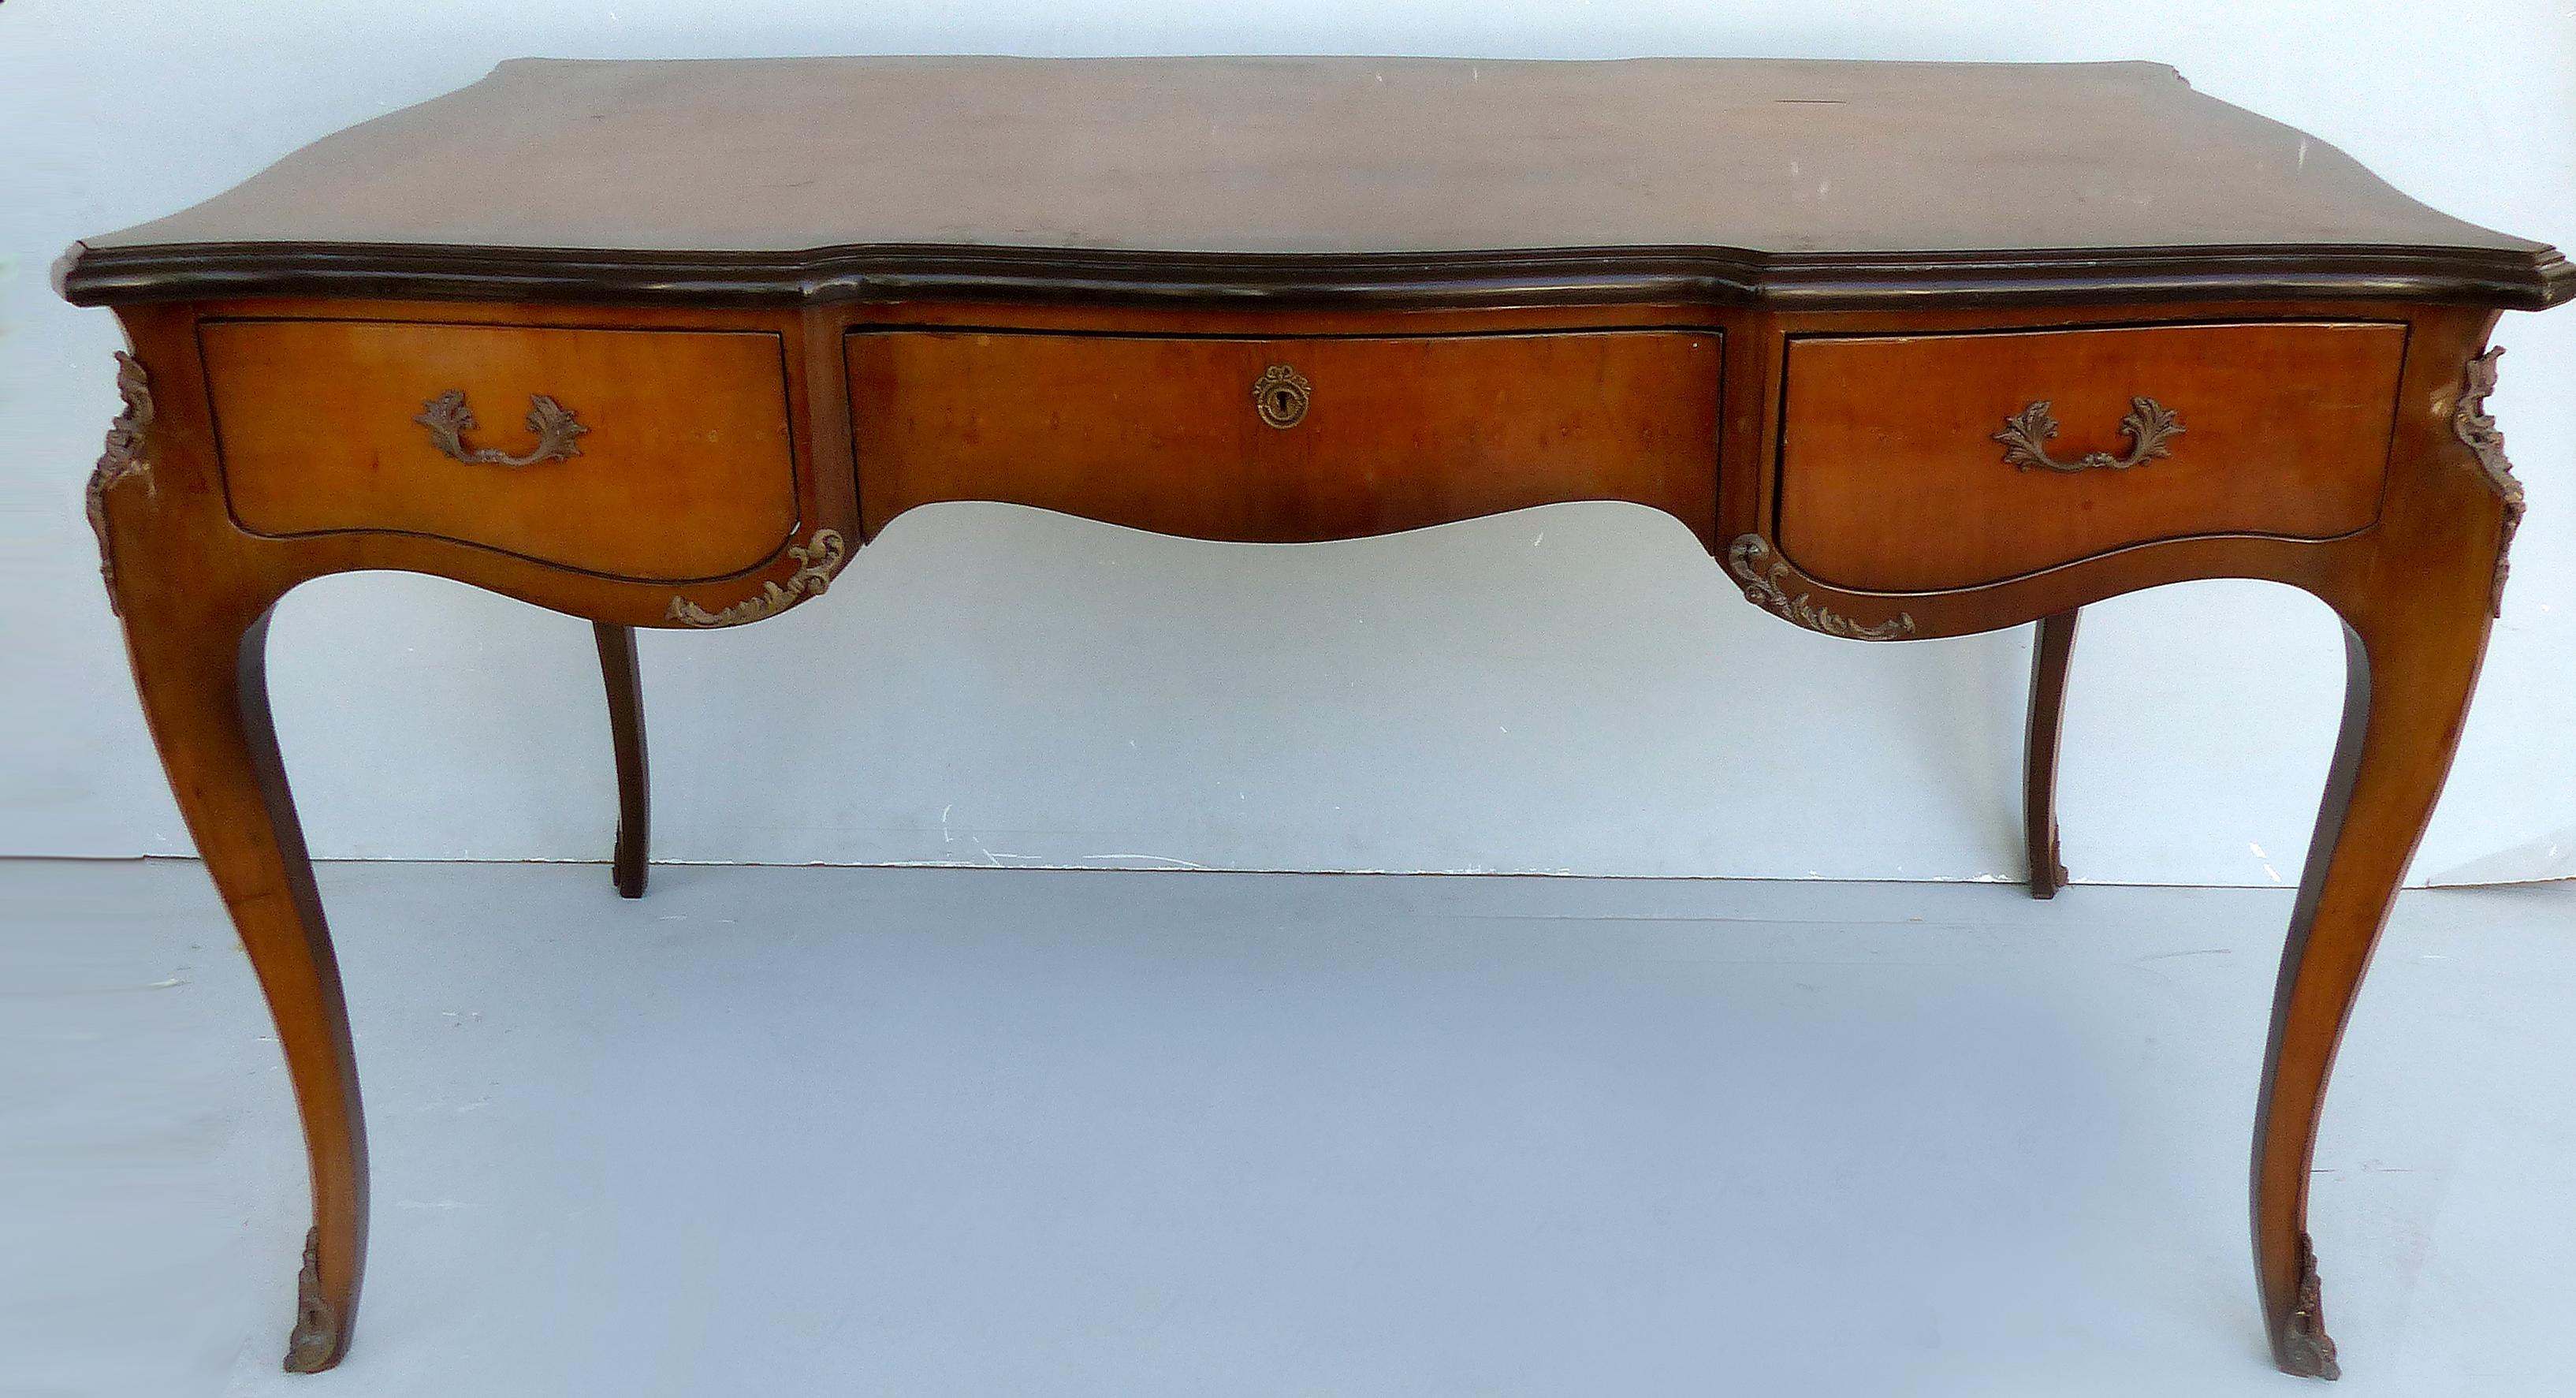 French Bureau Plat style Italian 3 Drawer Desk, Bronze Mounts

Offered for sale is a fine-quality Italian three-drawer desk reminiscent of the French bureau plat. This graceful desk has a French polish and bronze hardware including handles and